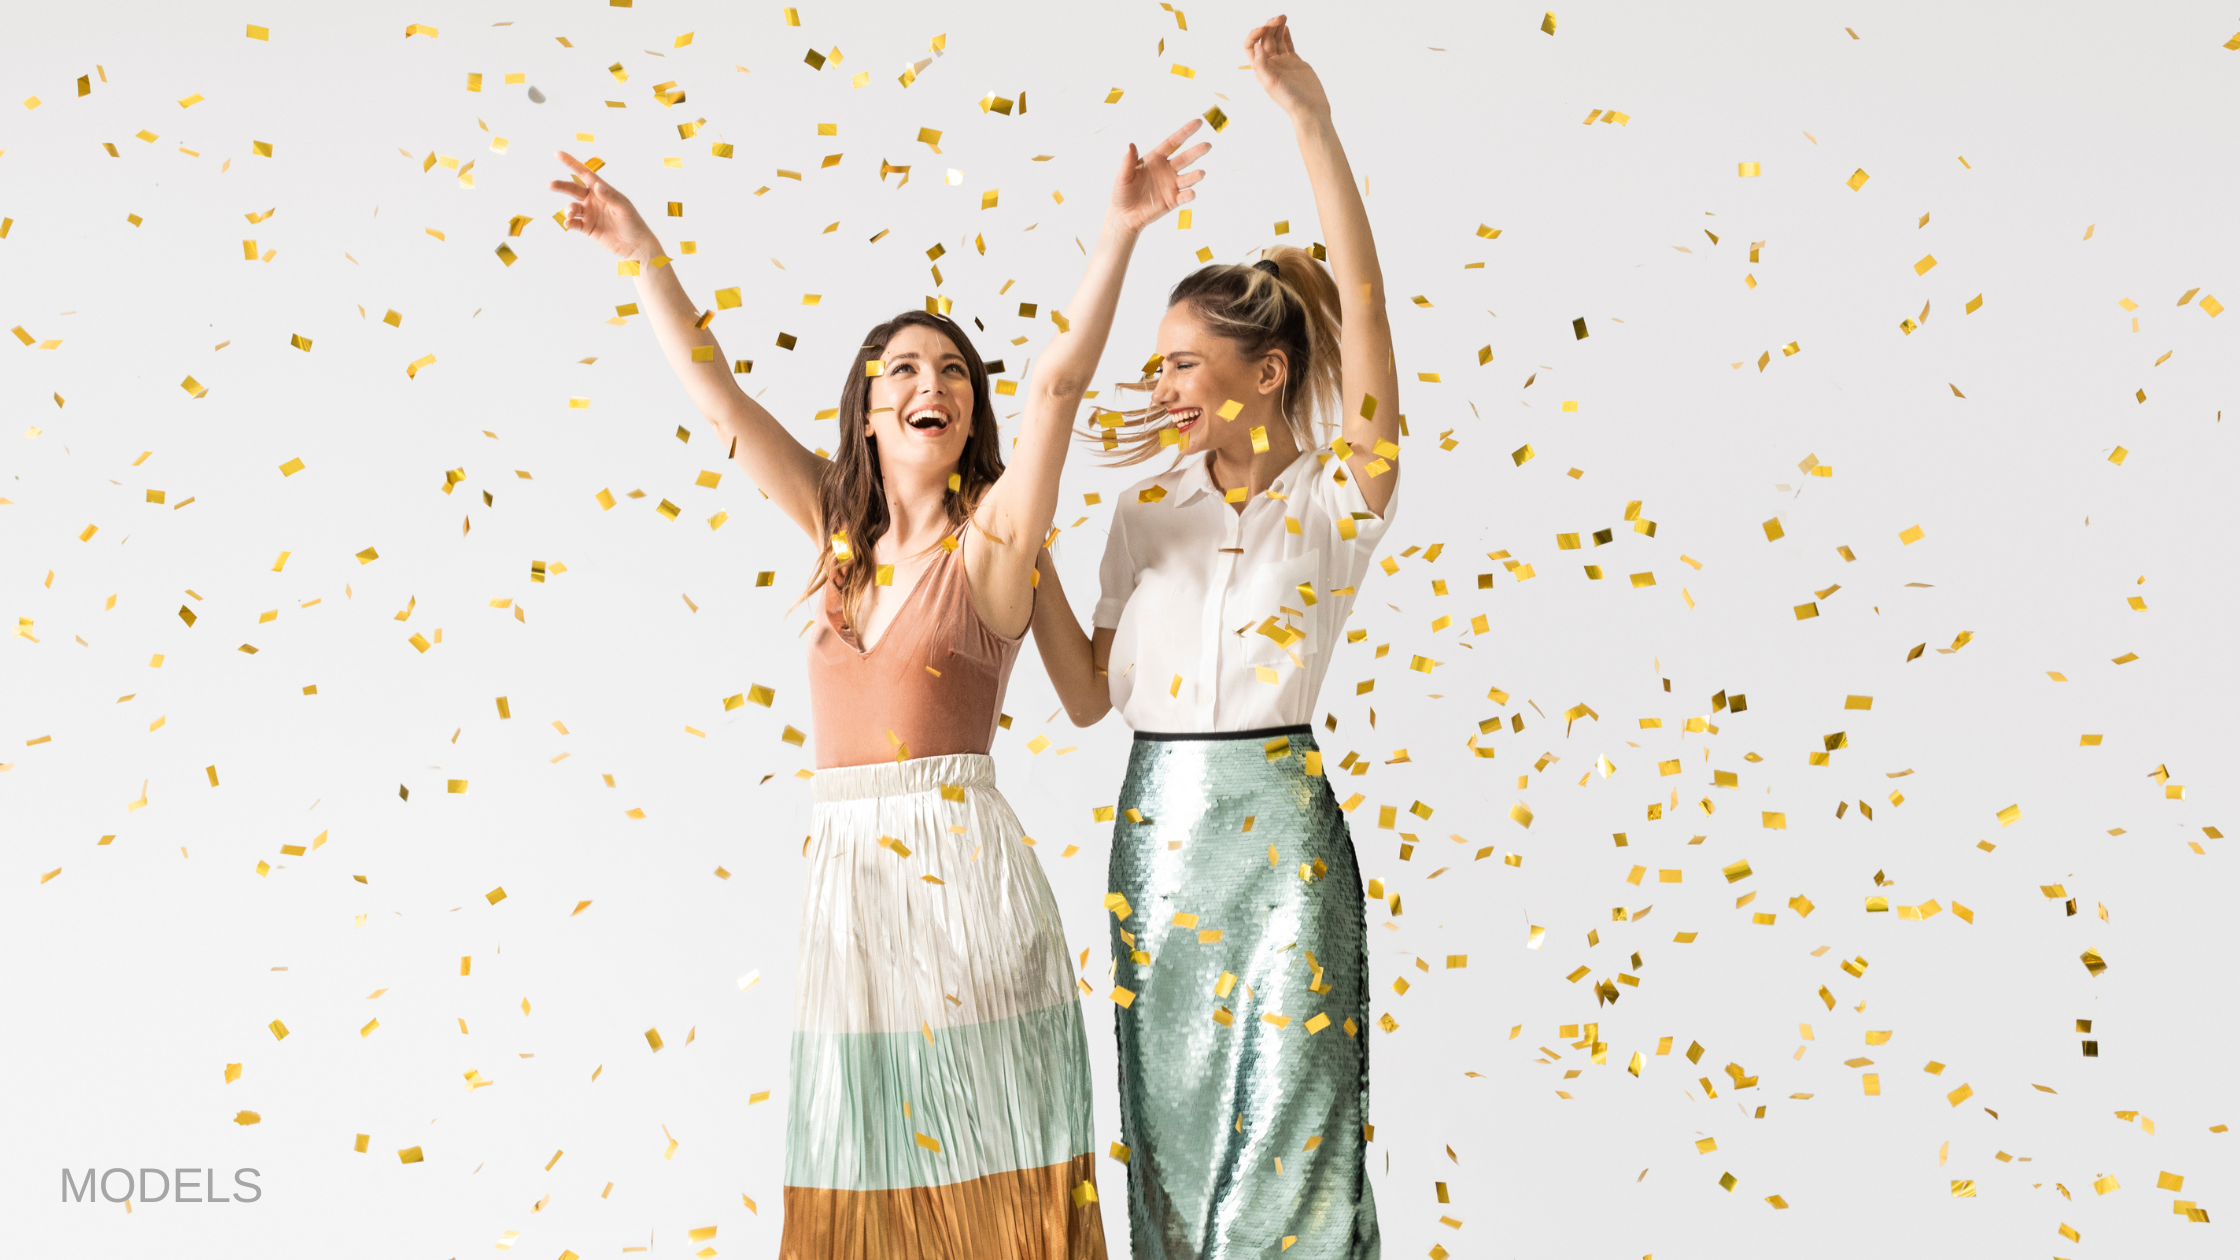 Two women standing in confetti with hands up and smiling. (MODELS)